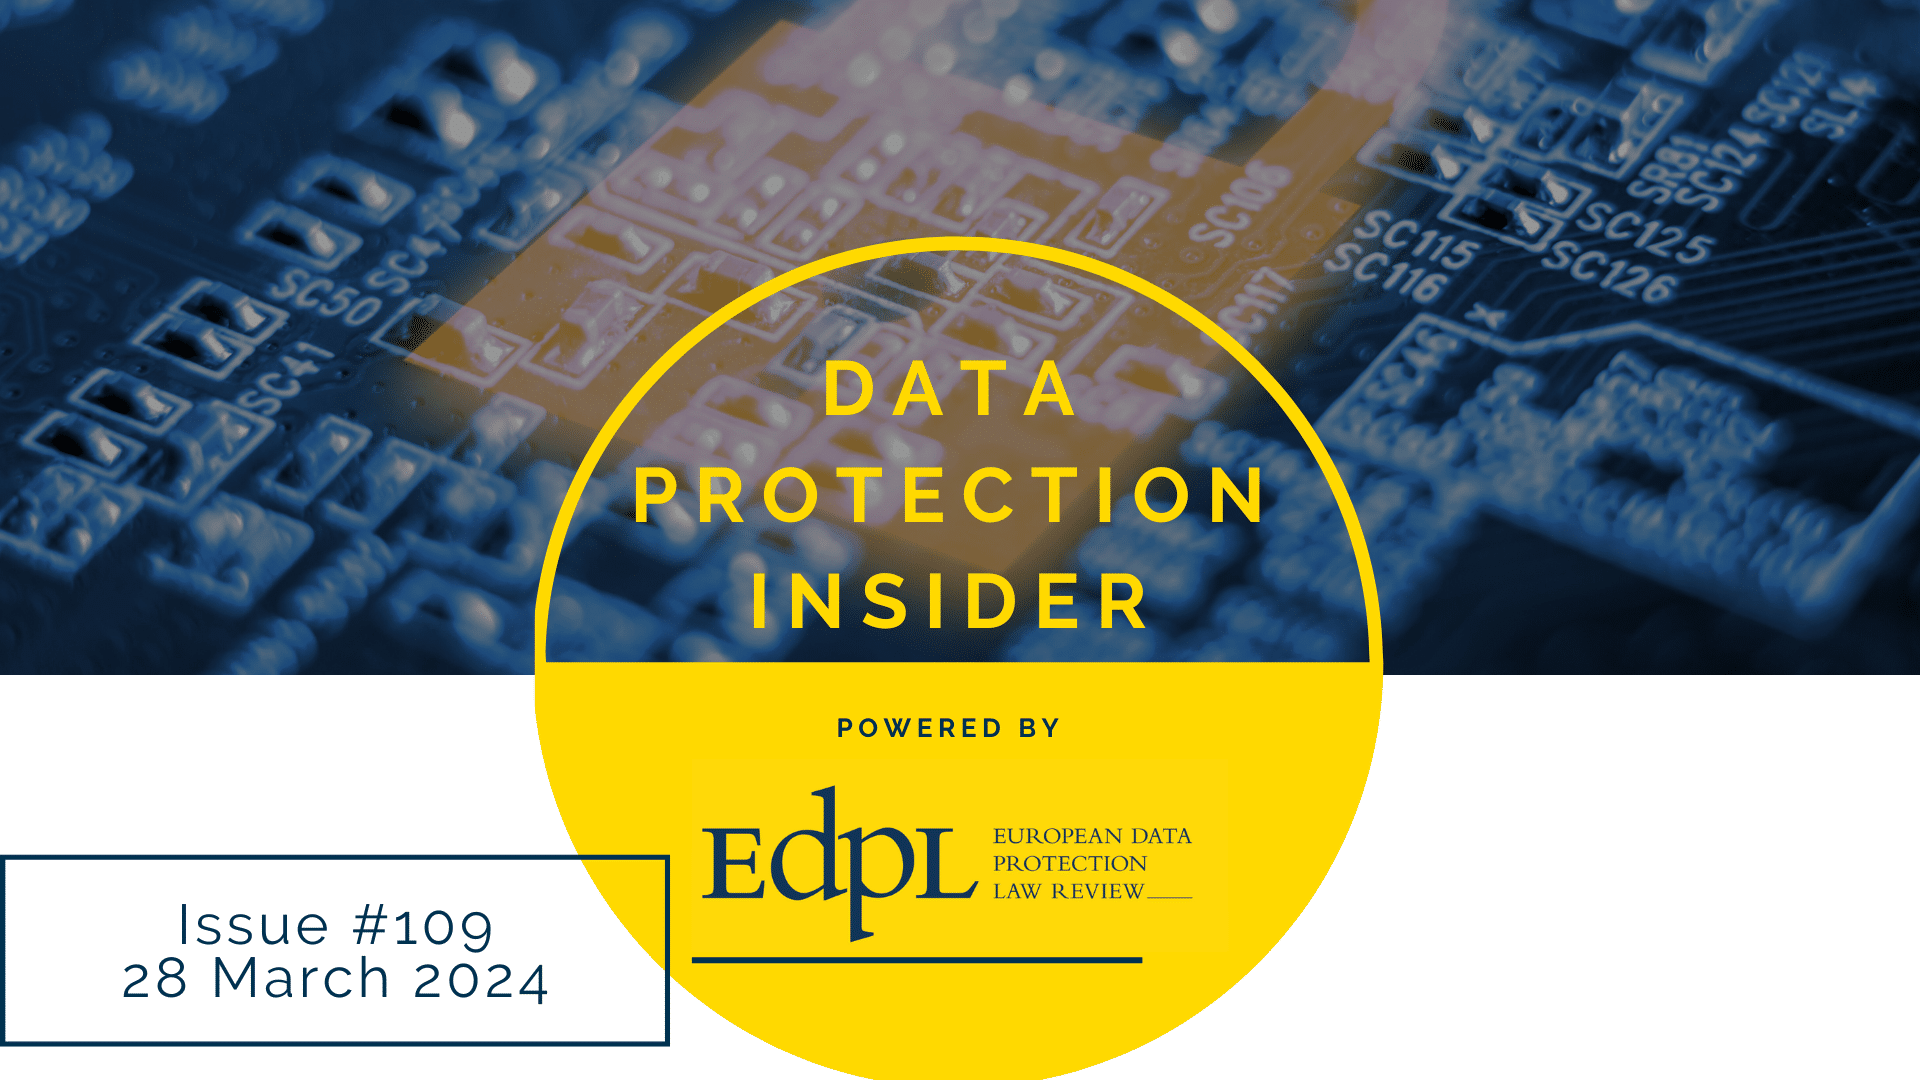 Data Protection Insider, Issue 109 - DPI 19